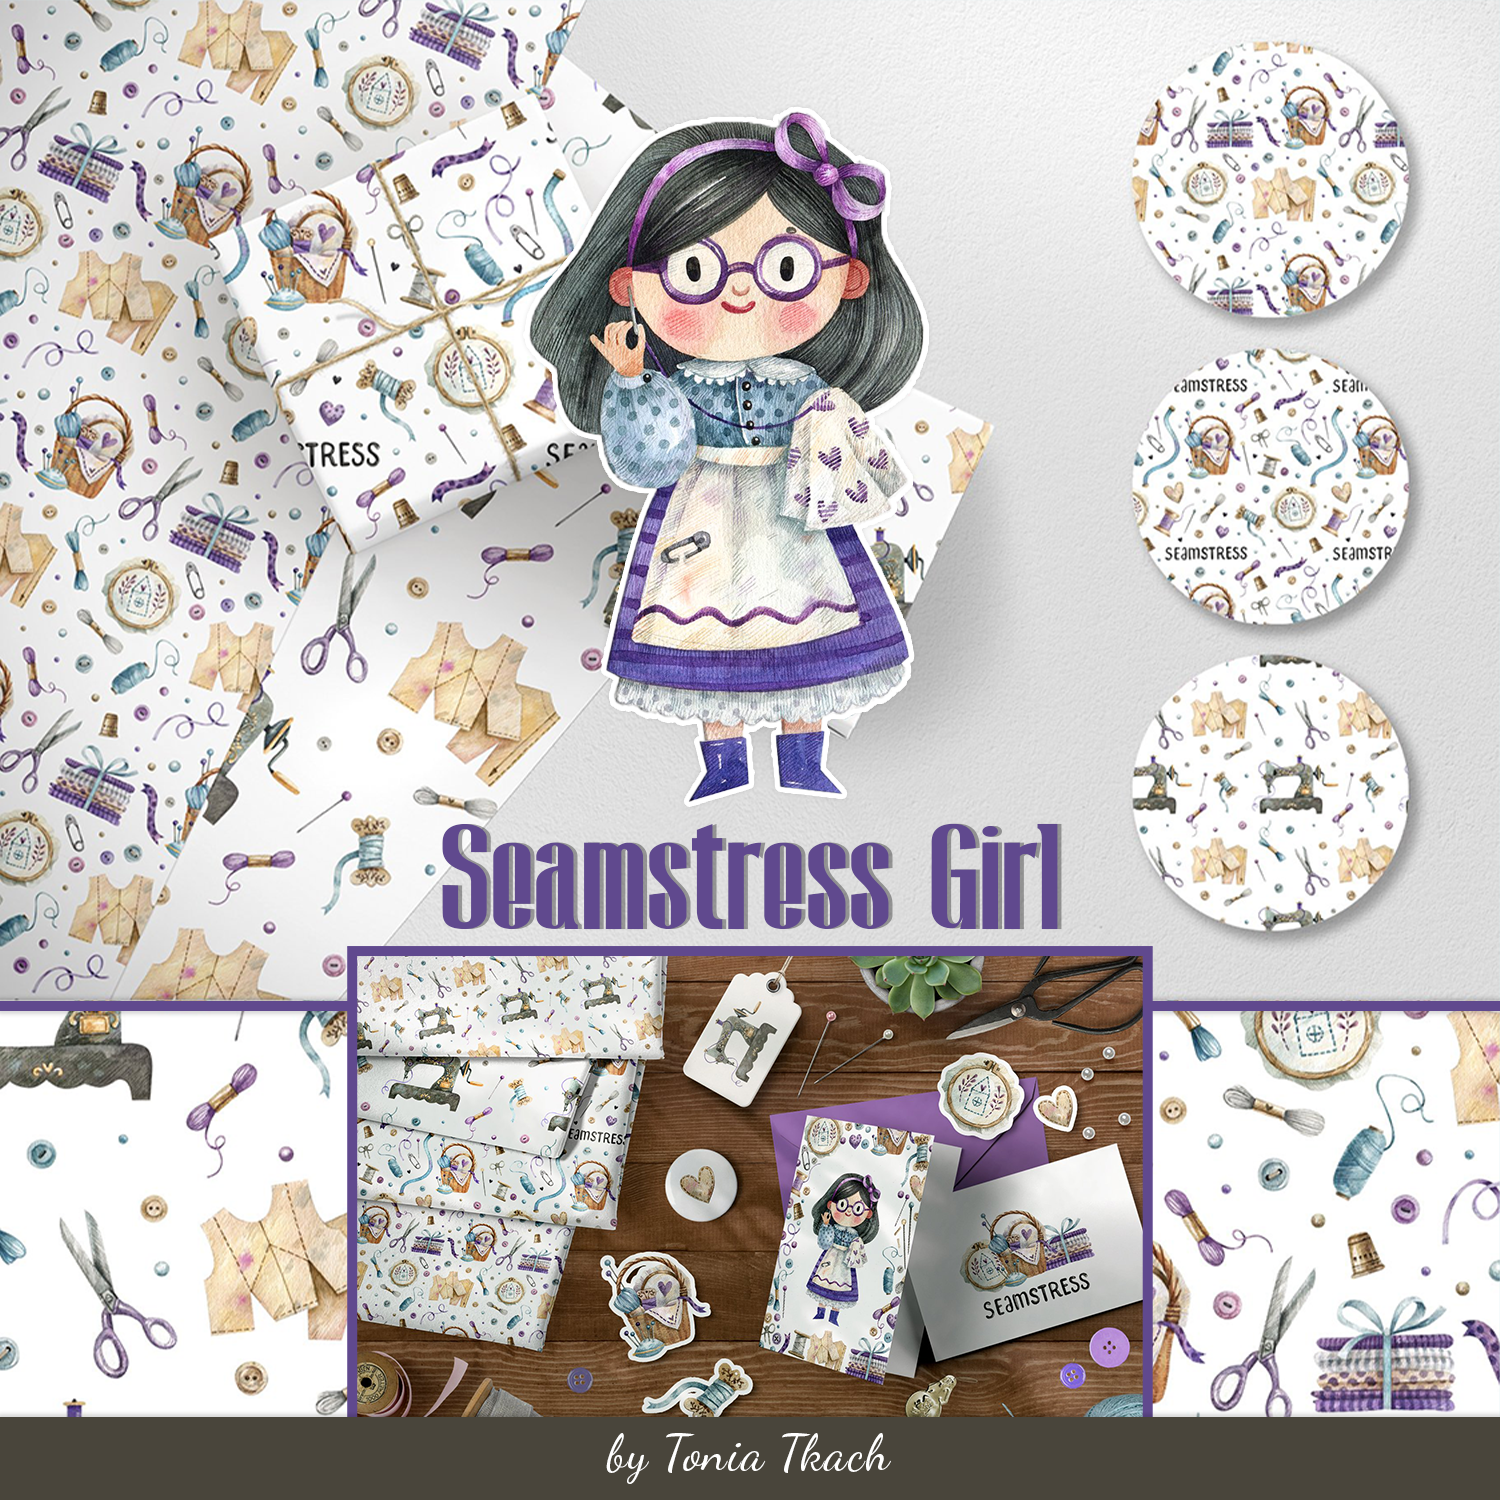 Background images and a girl in glasses with a purple dress.